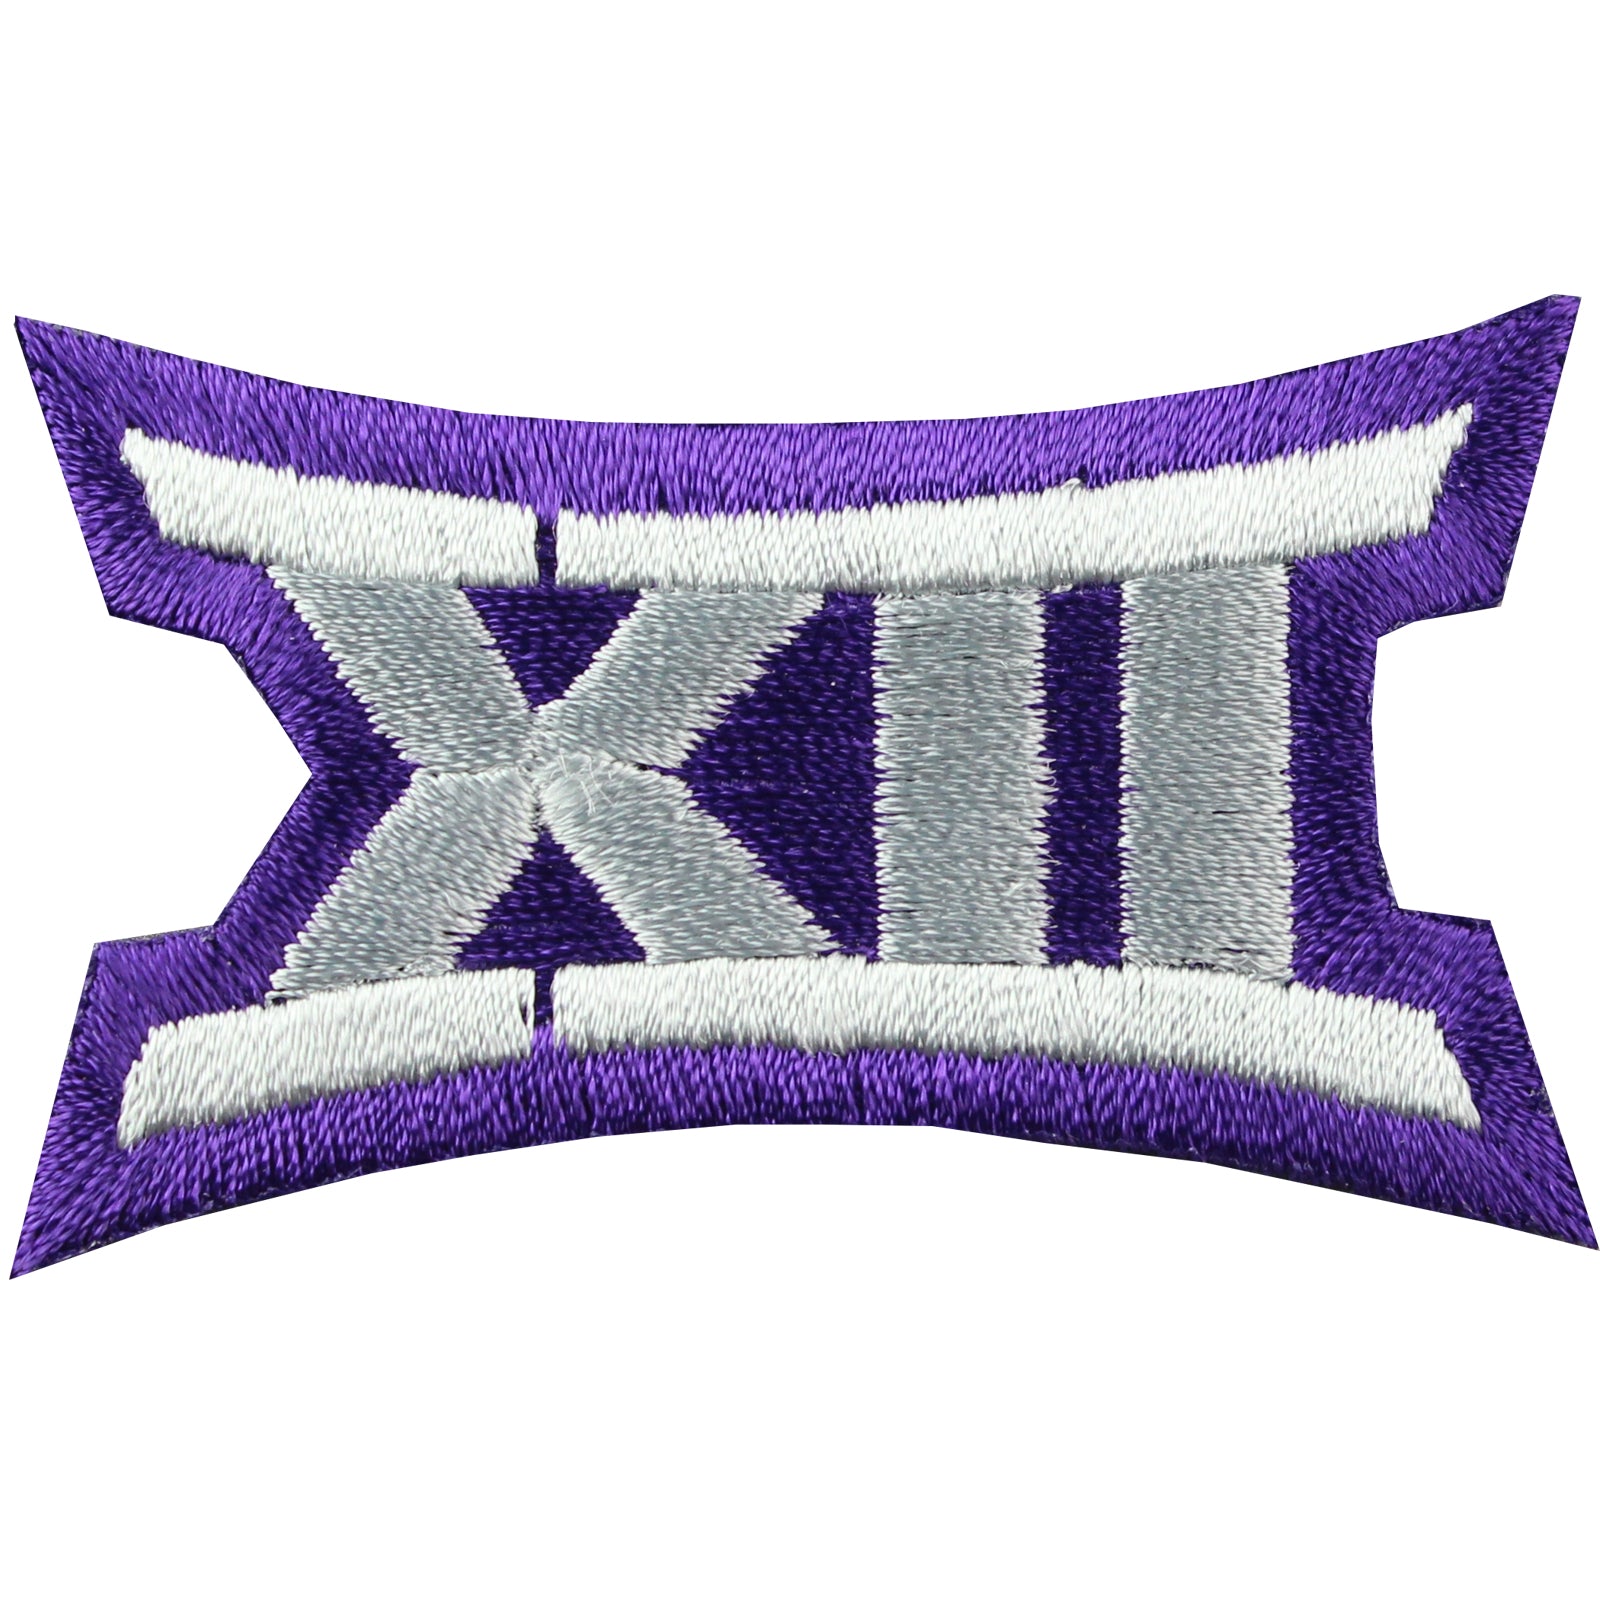 Big 12 XII Conference Team Jersey Uniform Patch TCU Horned Frogs 